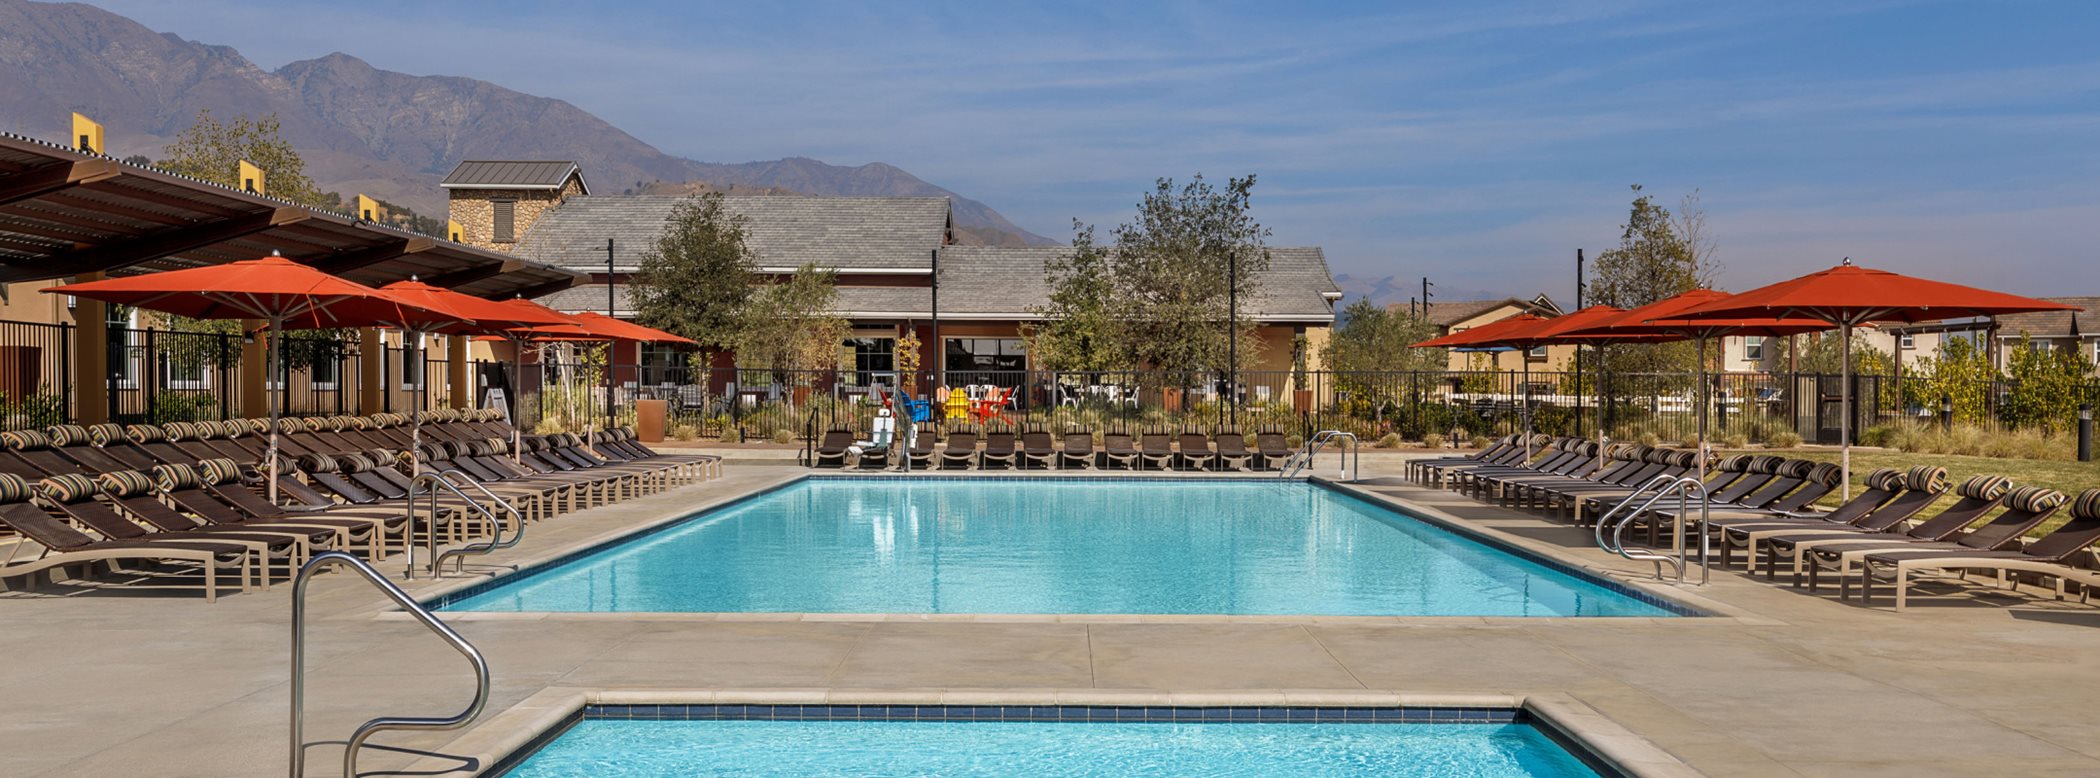 Image of the pool amenity